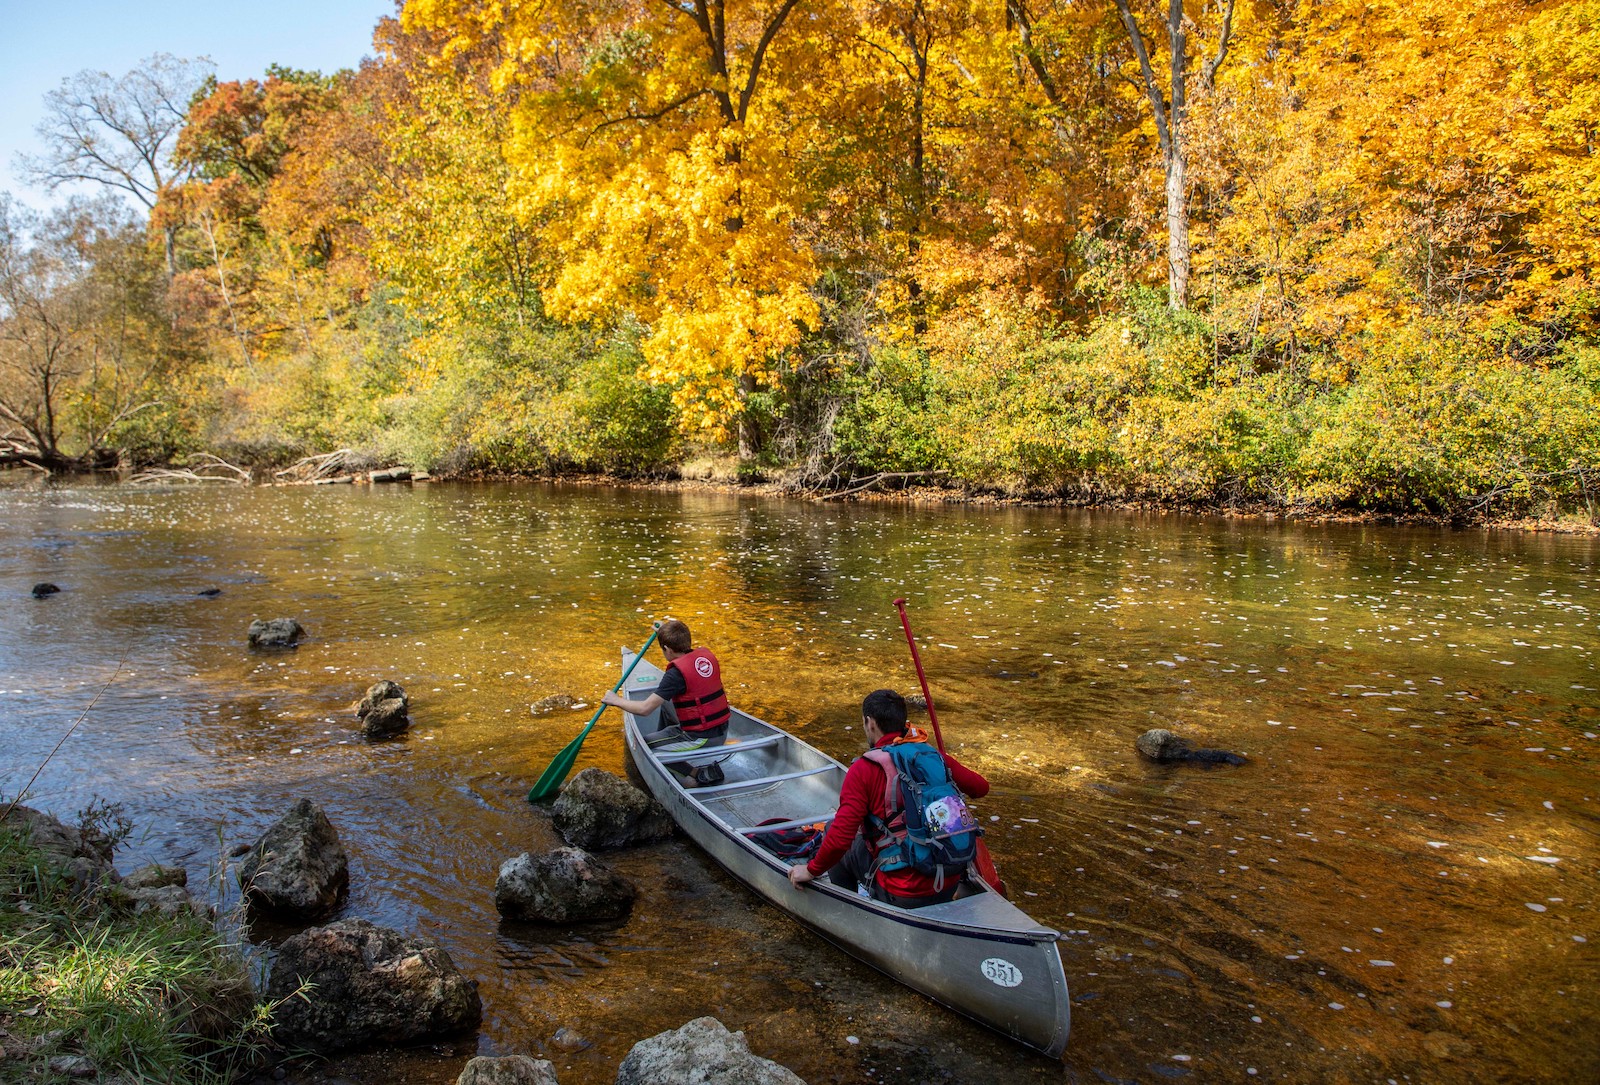 Canoers set off on the Hudson River to enjoy fall foliage at the Island Lake Recreation Center in Livingston County of Michigan, the United States, on Oct. 11, 2020.